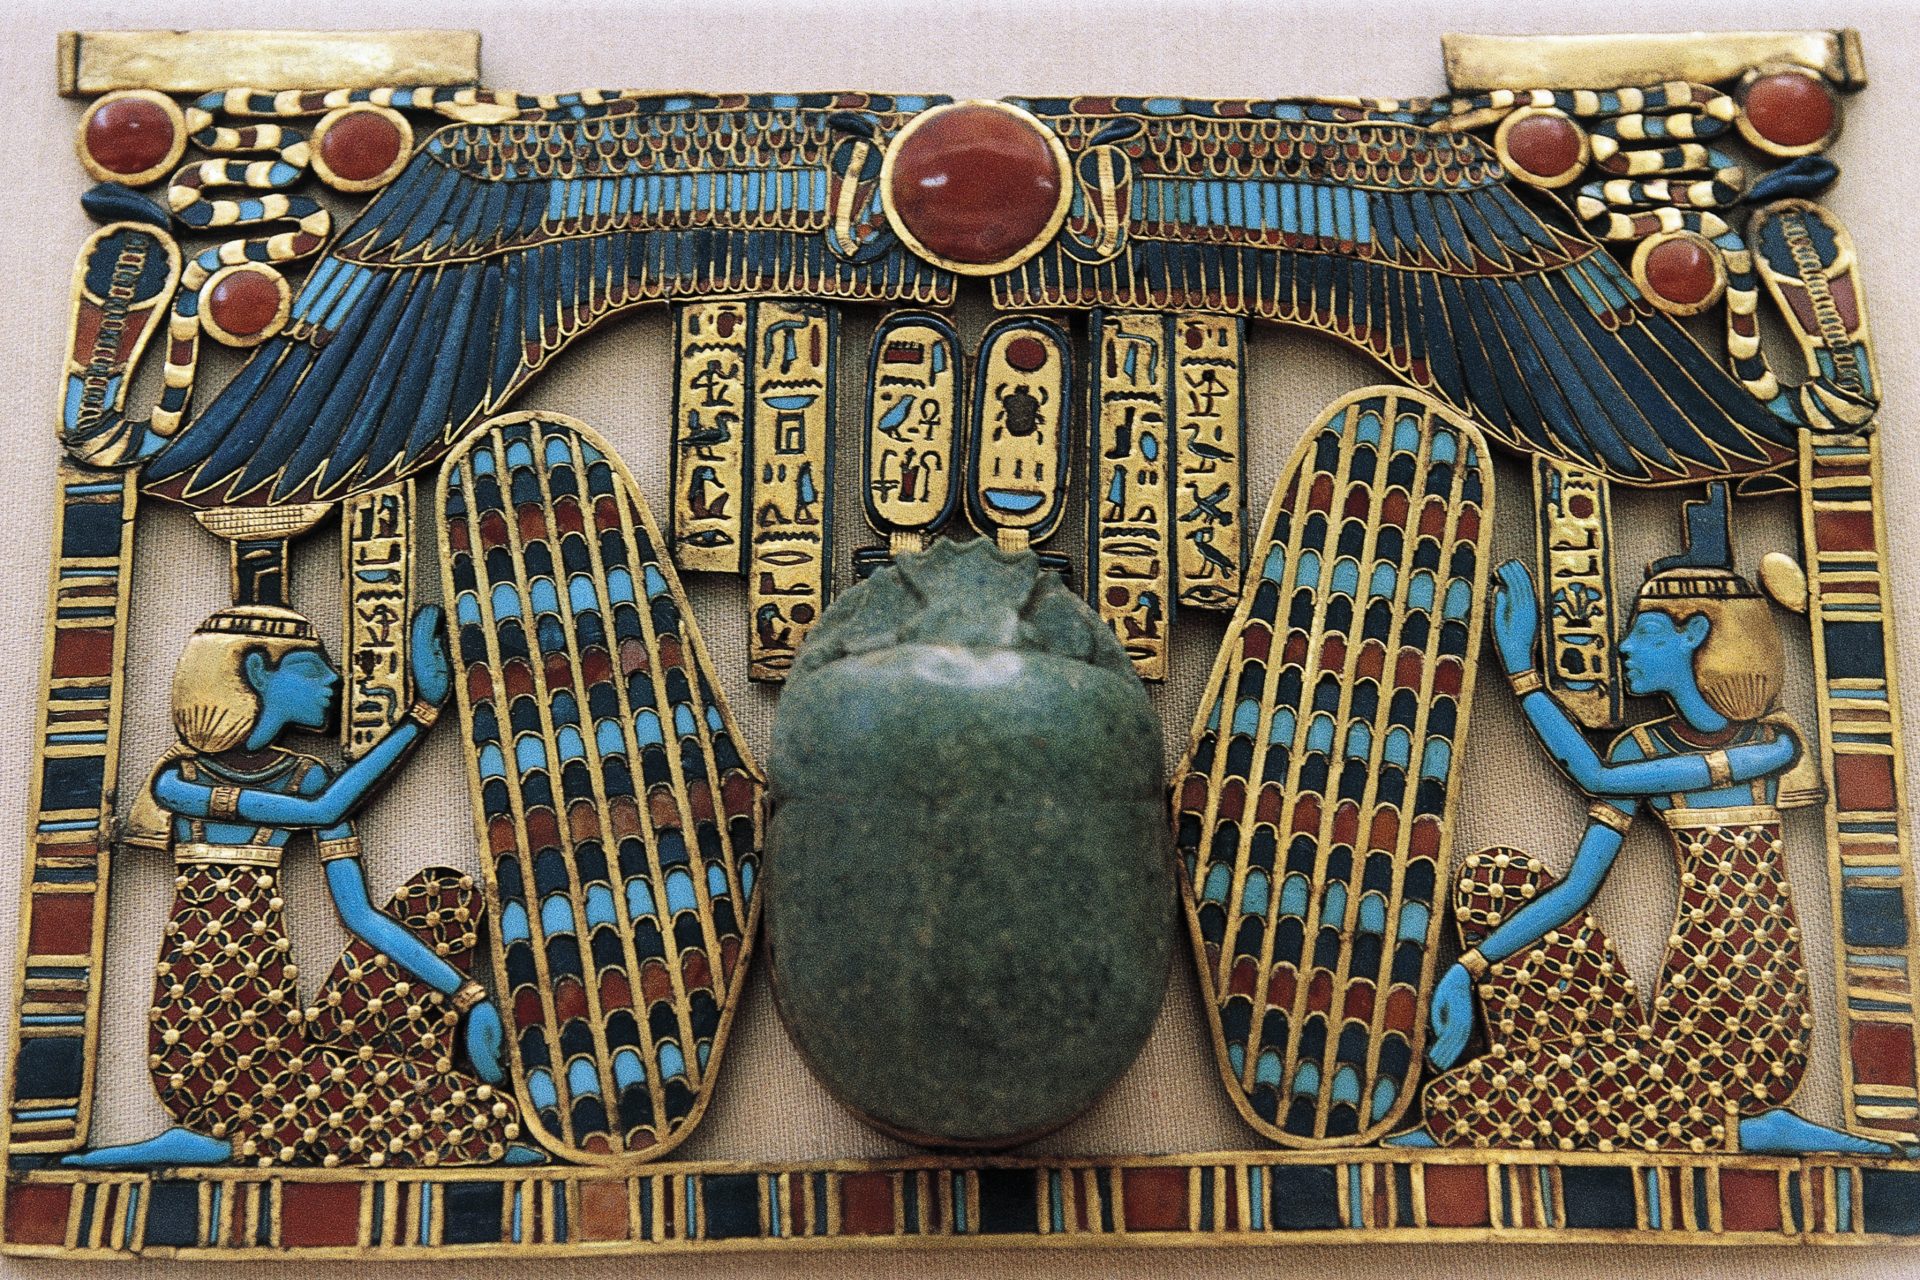 Other impressive treasures of the tomb 